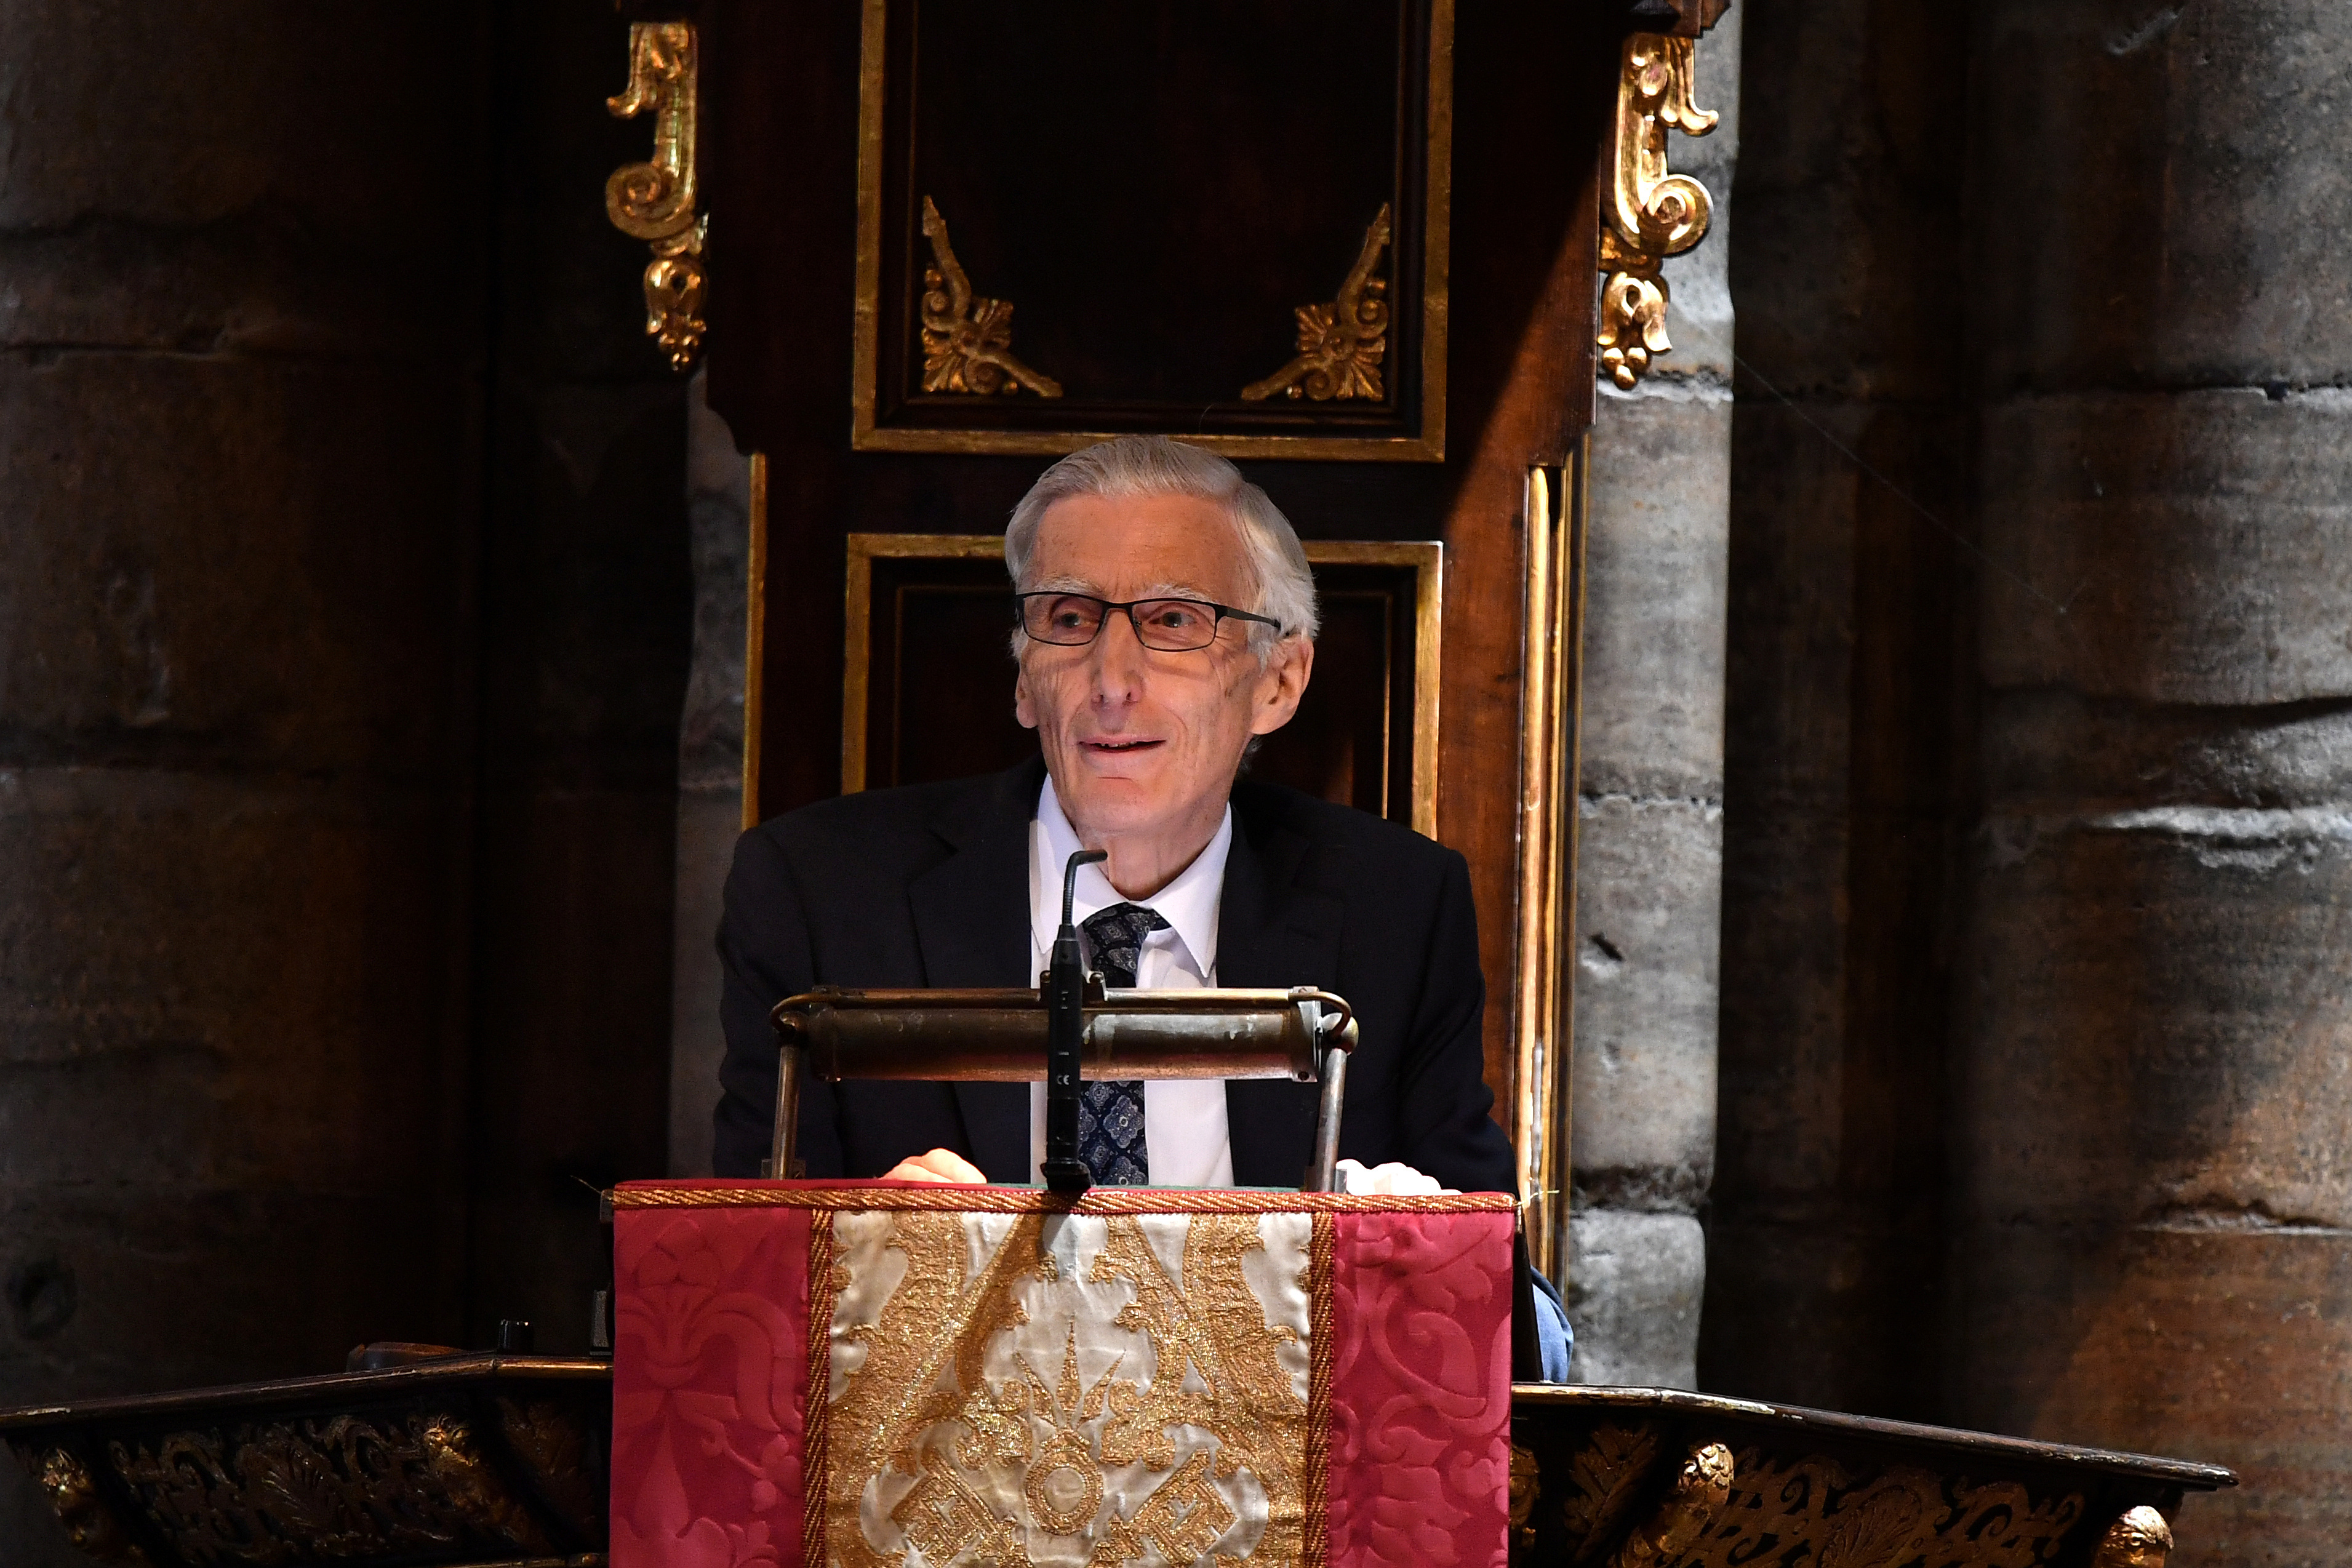 Astronomer Royal Martin Rees speaks at a memorial service for British scientist Stephen Hawking during which his ashes will be buried in the nave of the Abbey church, at Westminster Abbey, in London